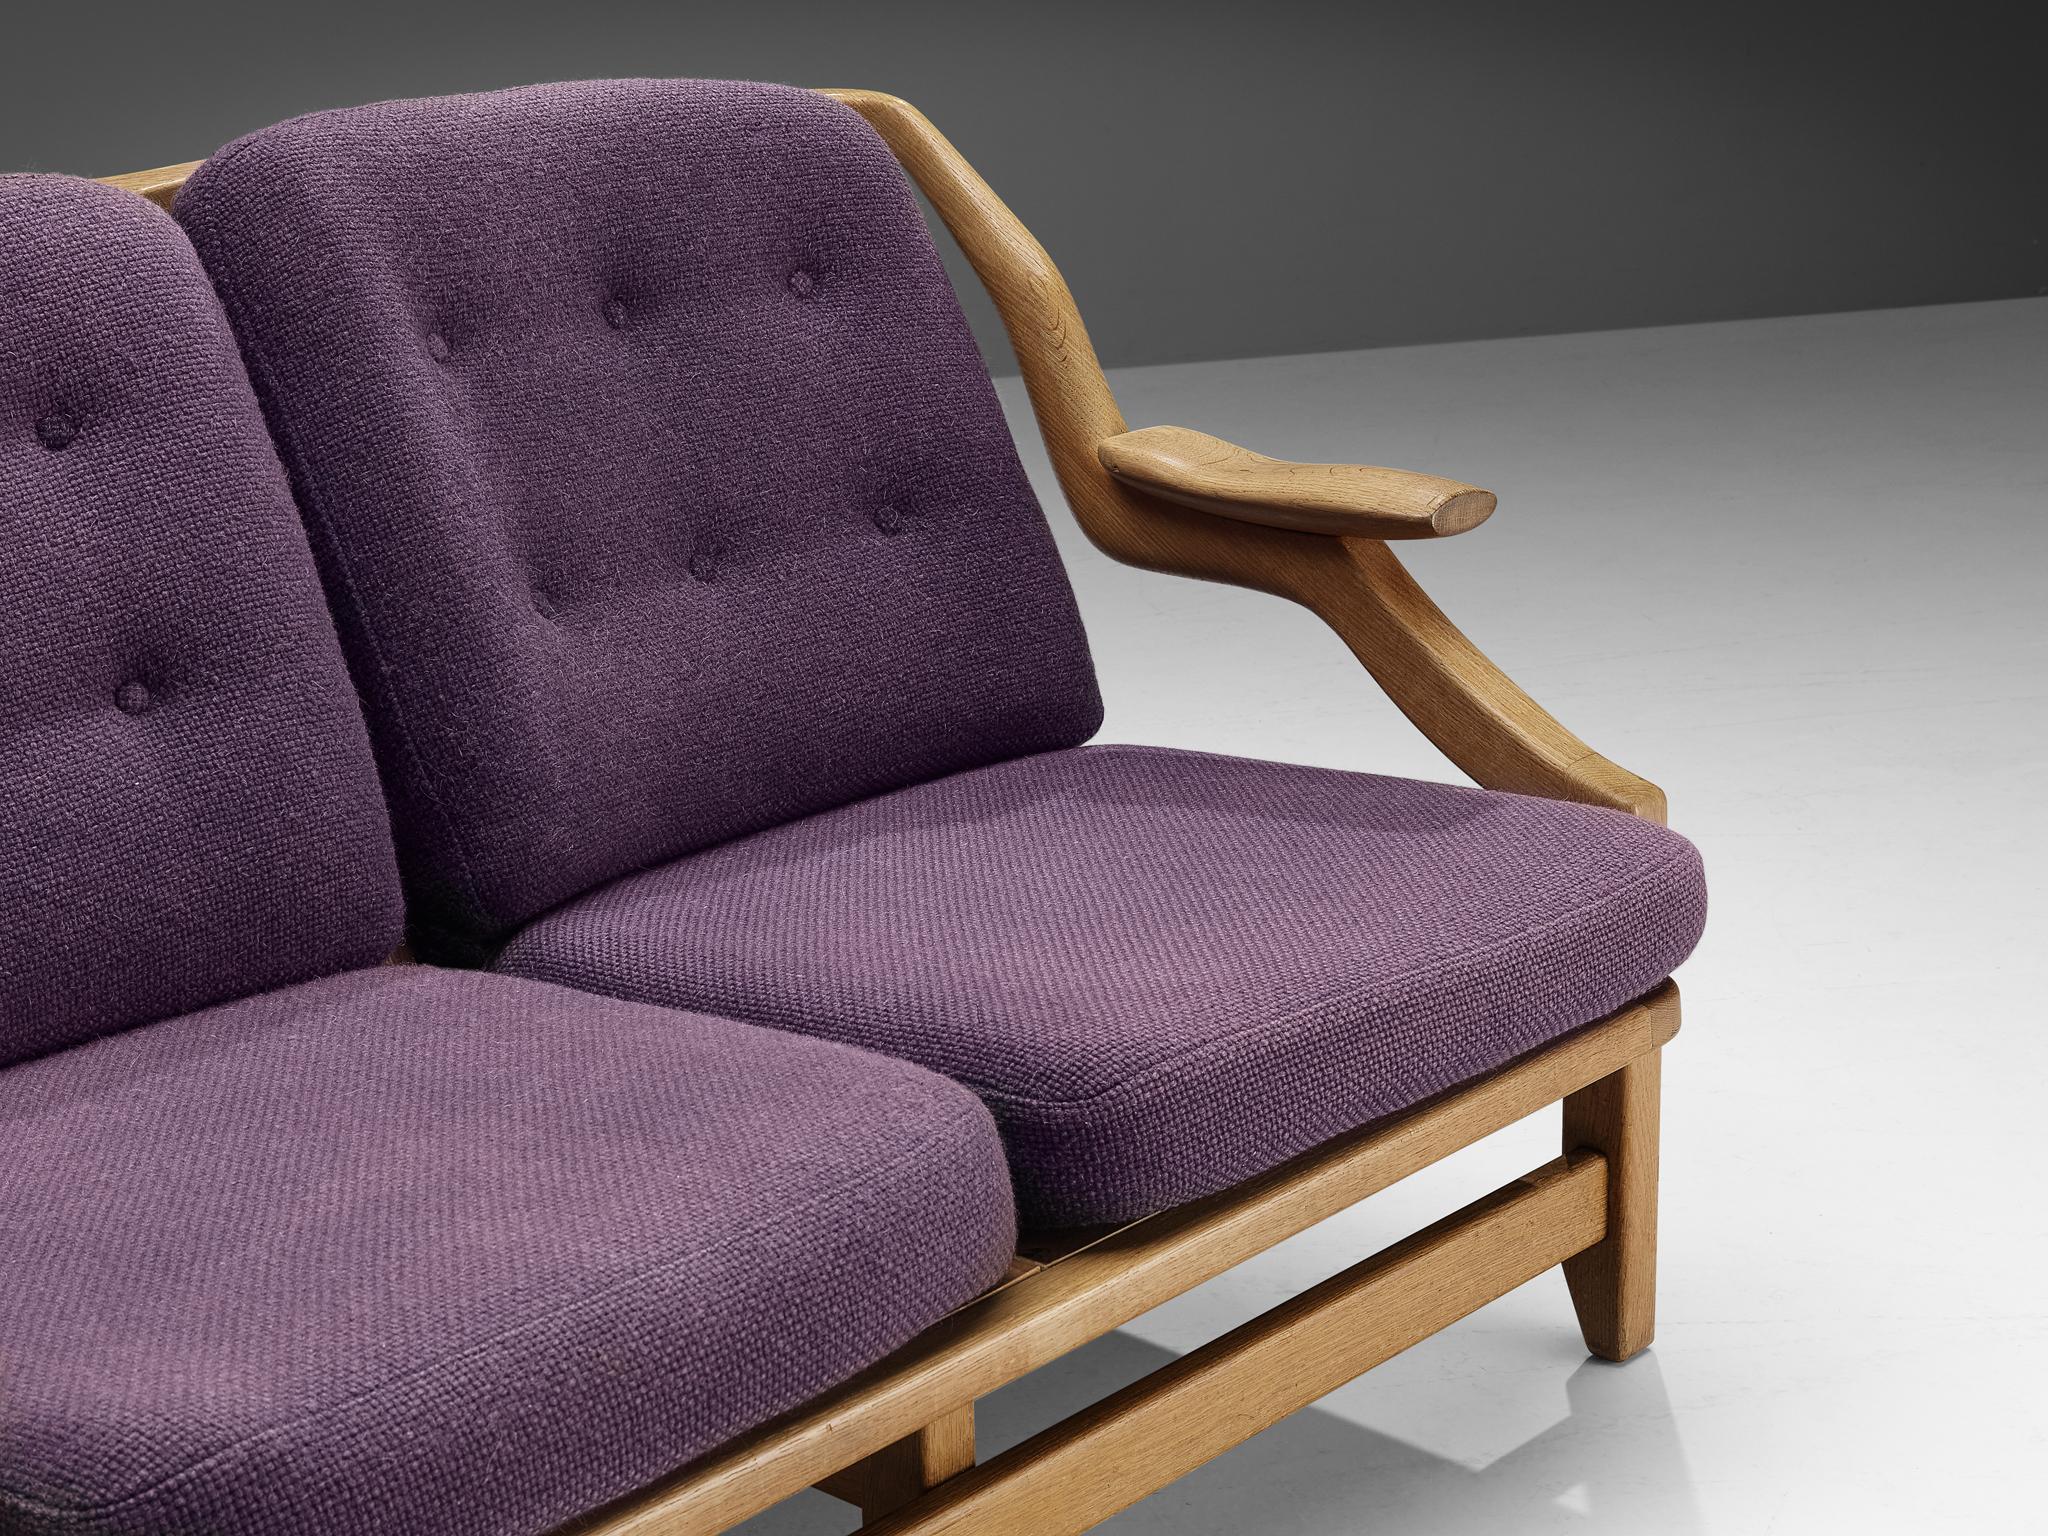 Mid-20th Century Guillerme & Chambron Sofa in Oak and Purple Upholstery For Sale